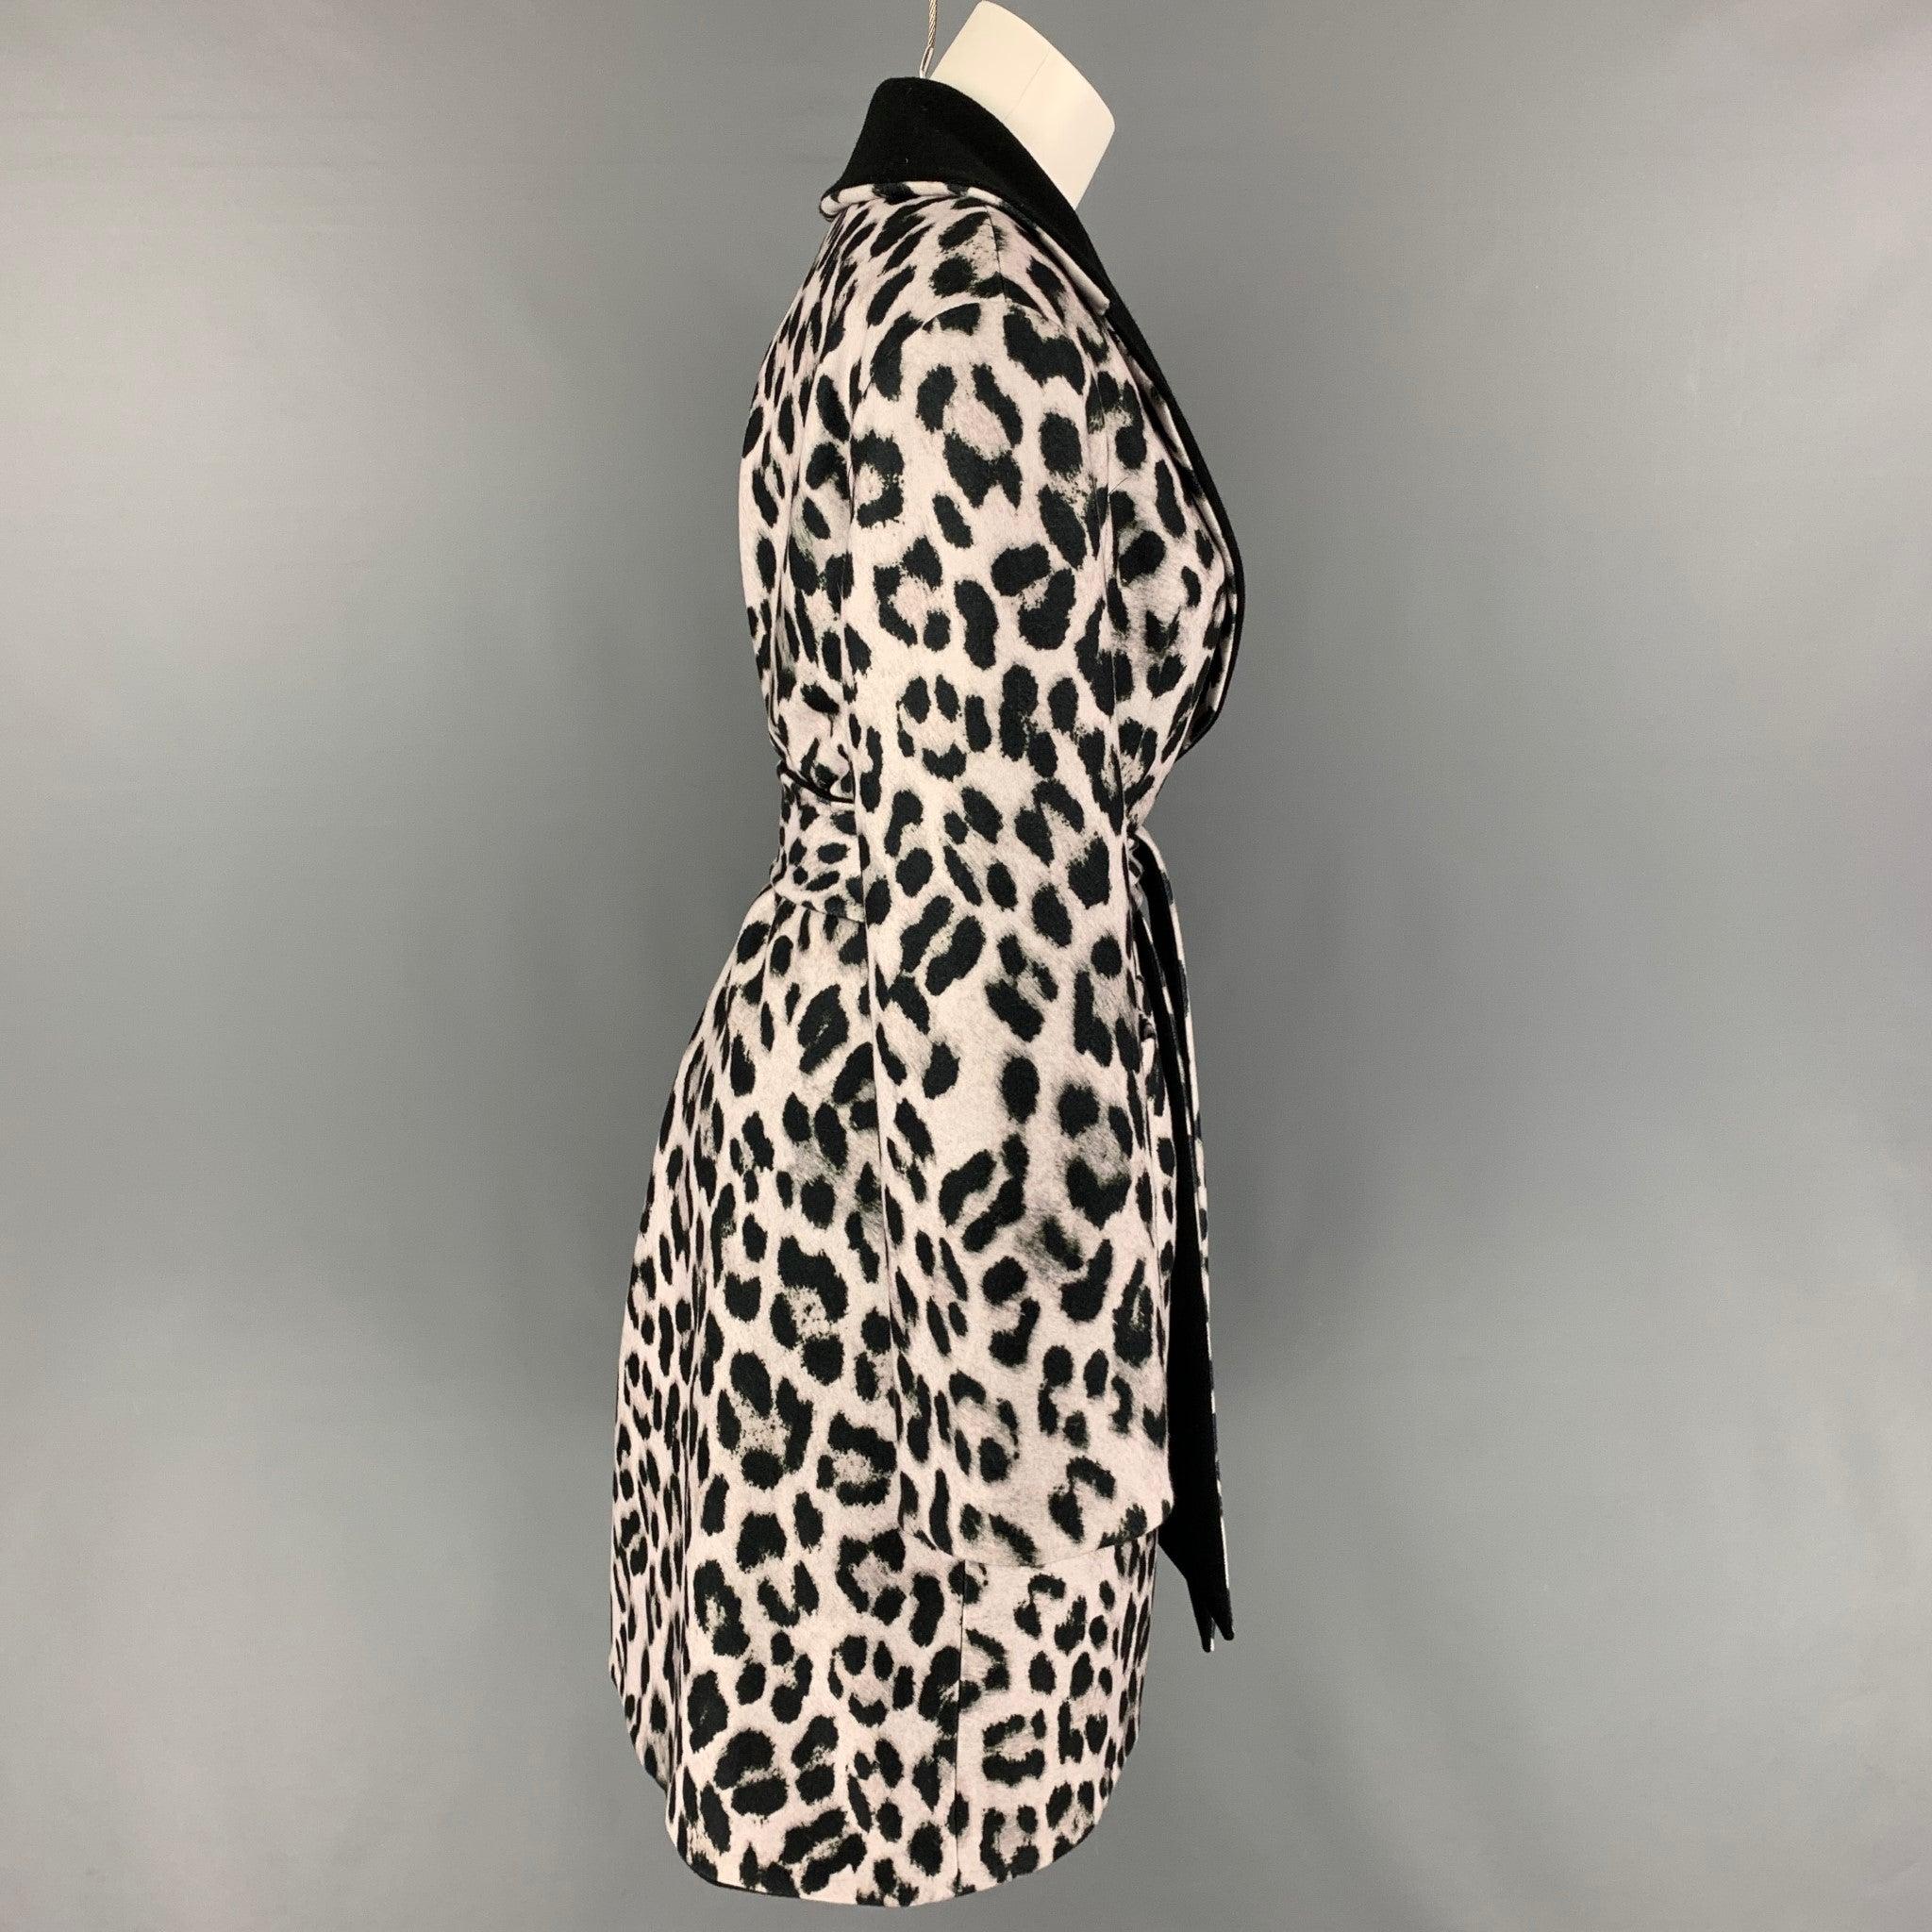 ALICE + OLIVIA coat comes in a black & white animal print polyester featuring a reversible style, belted, notch lapel, patch pockets, and a open front.
Very Good
Pre-Owned Condition. 

Marked:   XS/S 

Measurements: 
 
Shoulder: 18.5 inches  Bust: